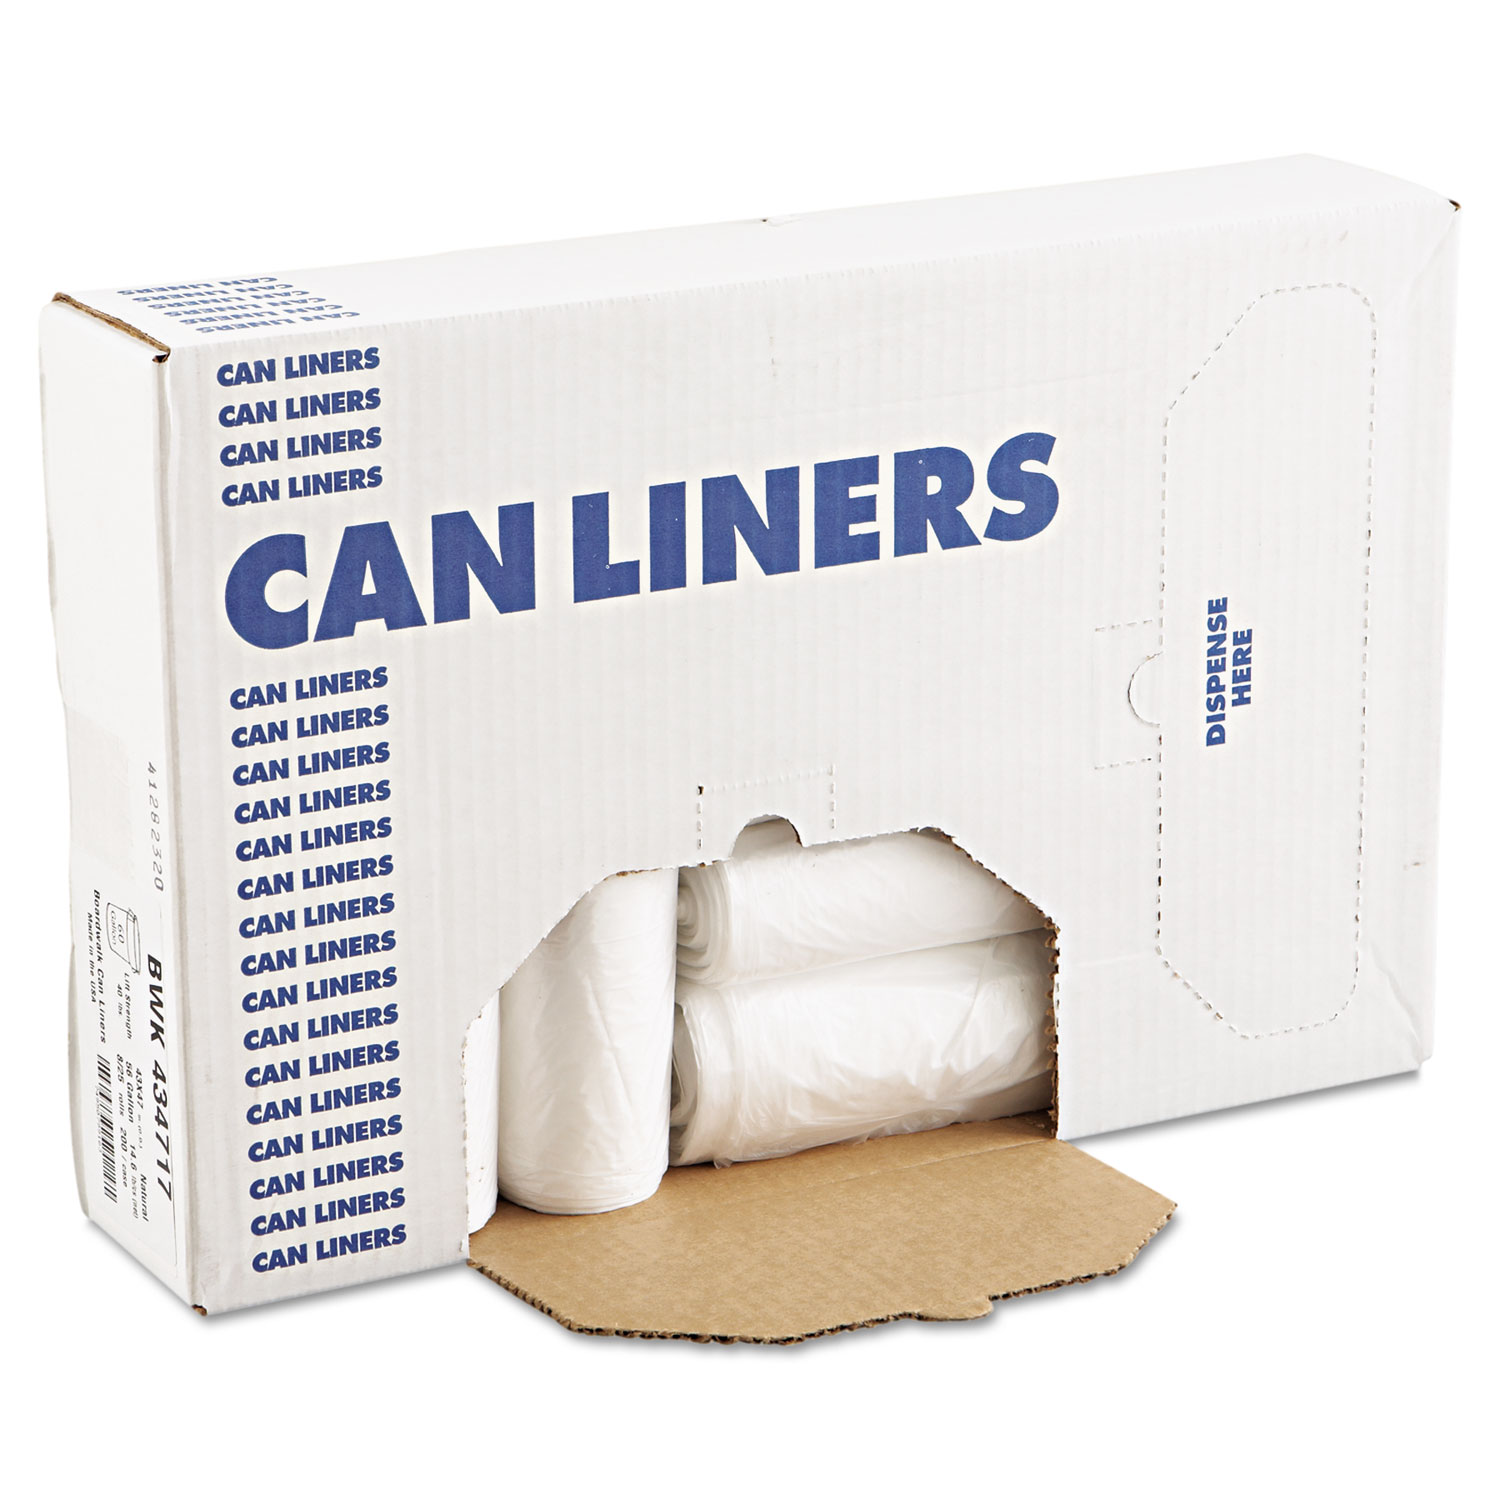  AccuFit Z5845HN R01 High-Density Can Liners with AccuFit Sizing, 23 gal, 14 microns, 29 x 45, Natural, 250/Carton (HERZ5845HNR01) 